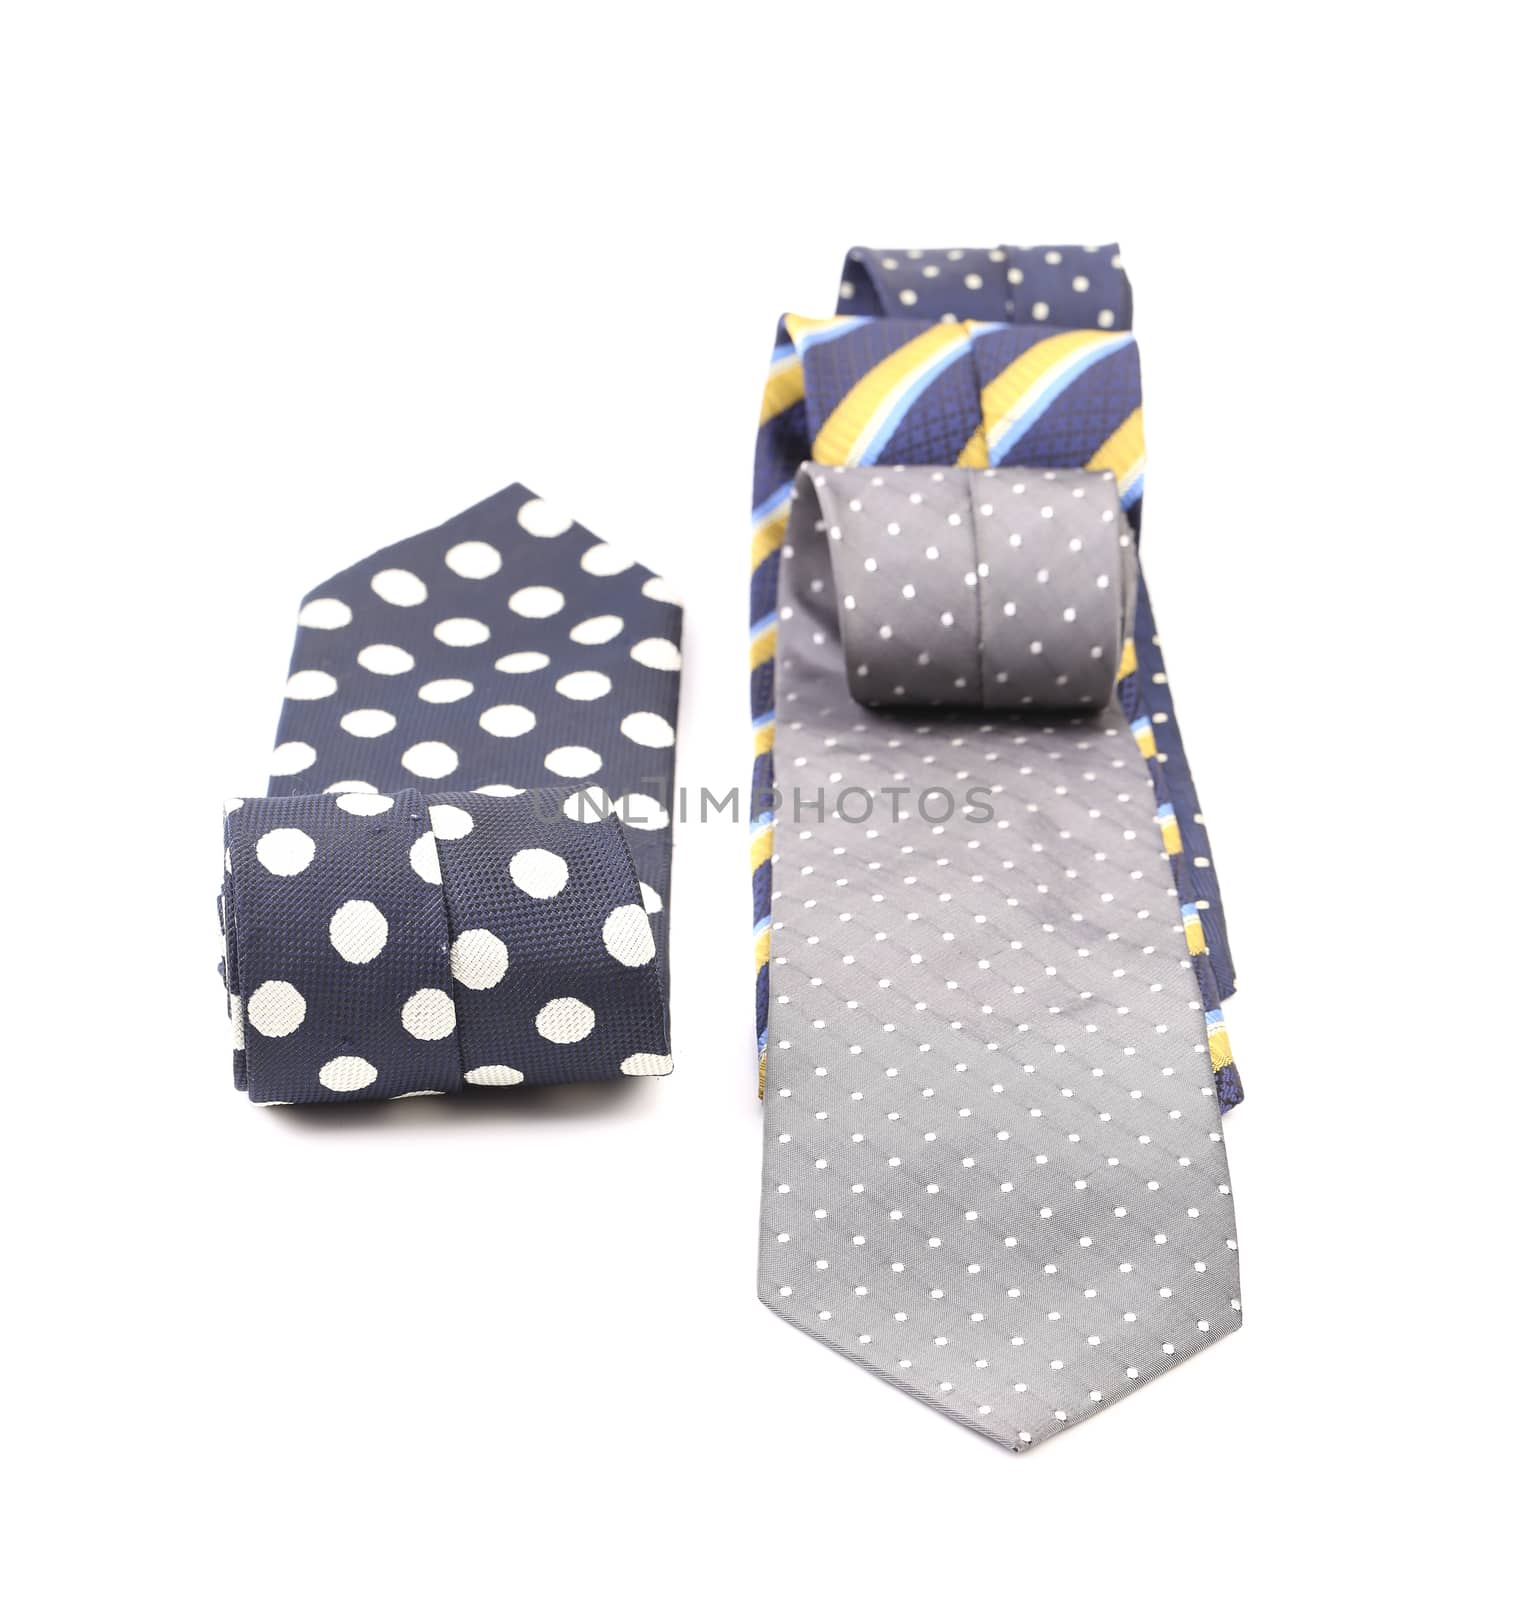 Three rolled multi-colored tie. Isolated on white background.